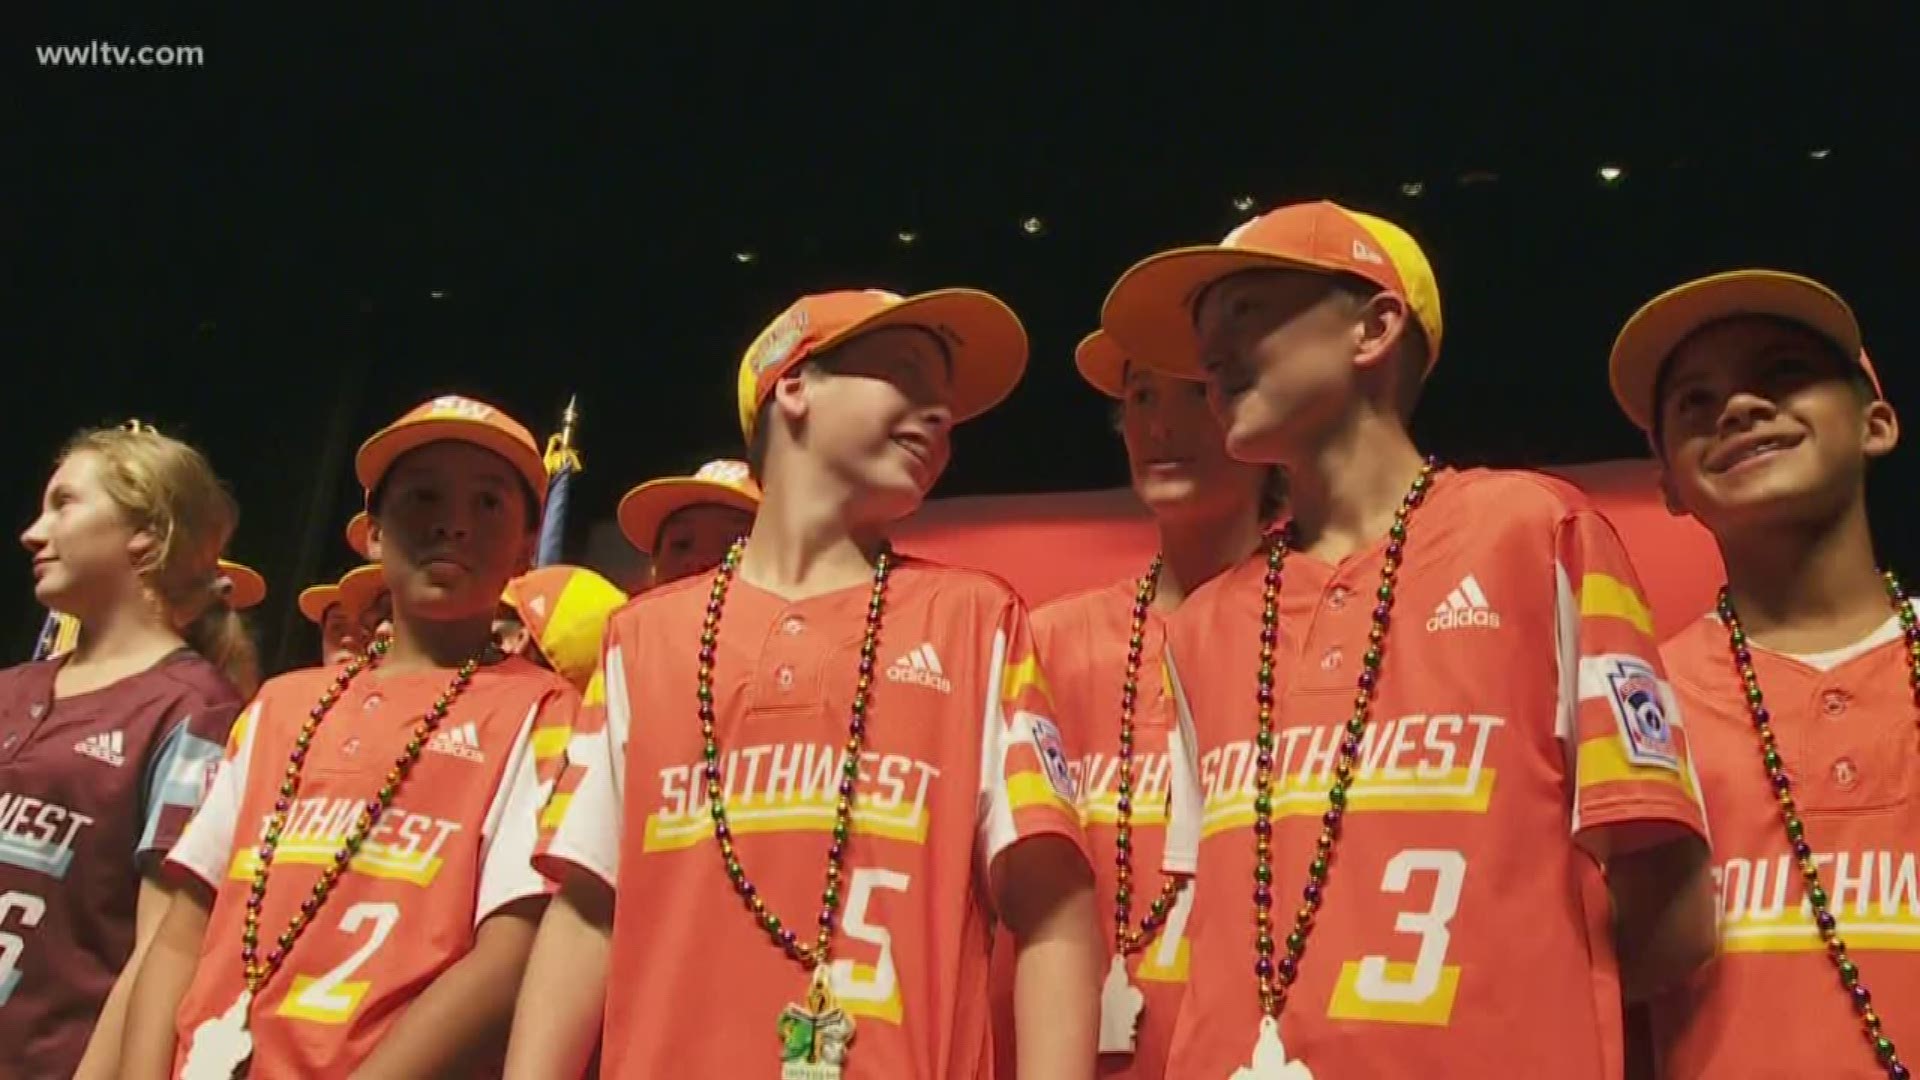 The team of Jefferson Parish kids became the first from Louisiana to win the Little League World Series on Sunday, winning six straight elimination games after a first-round loss in Pennsylvania to claim the title of world champions.